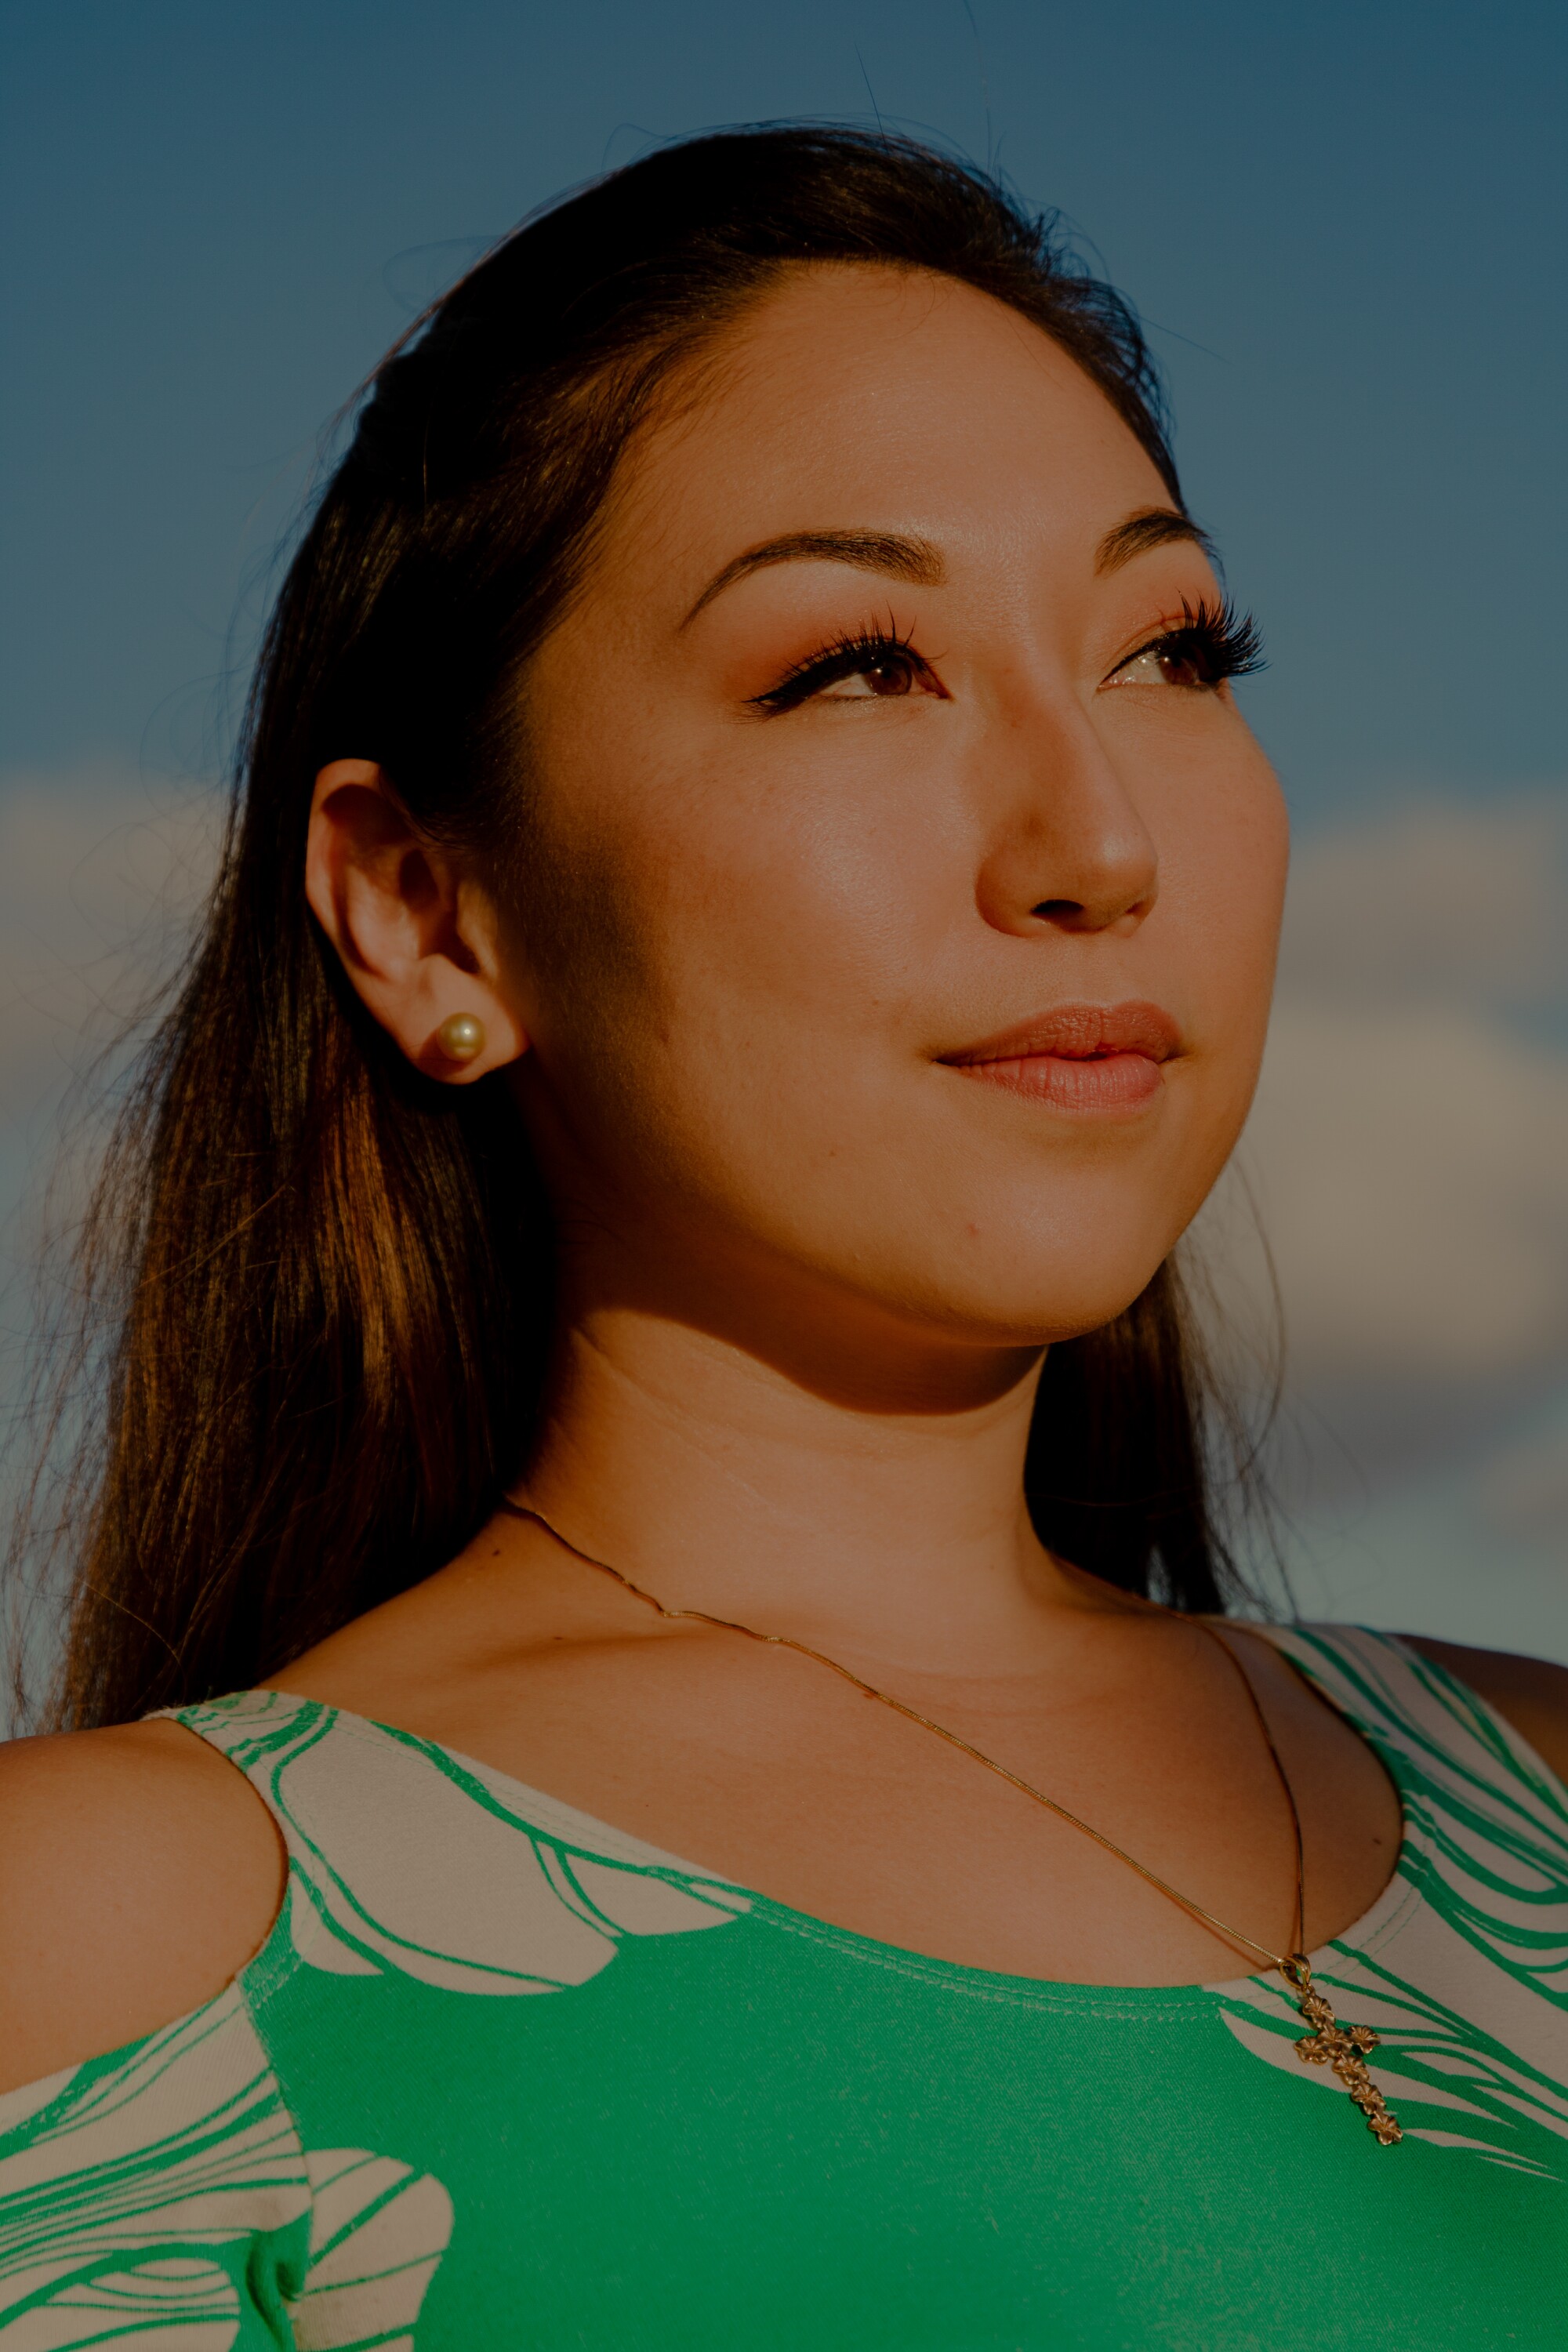 A woman wearing a green patterned top and a cross around her neck while looking off into the distance